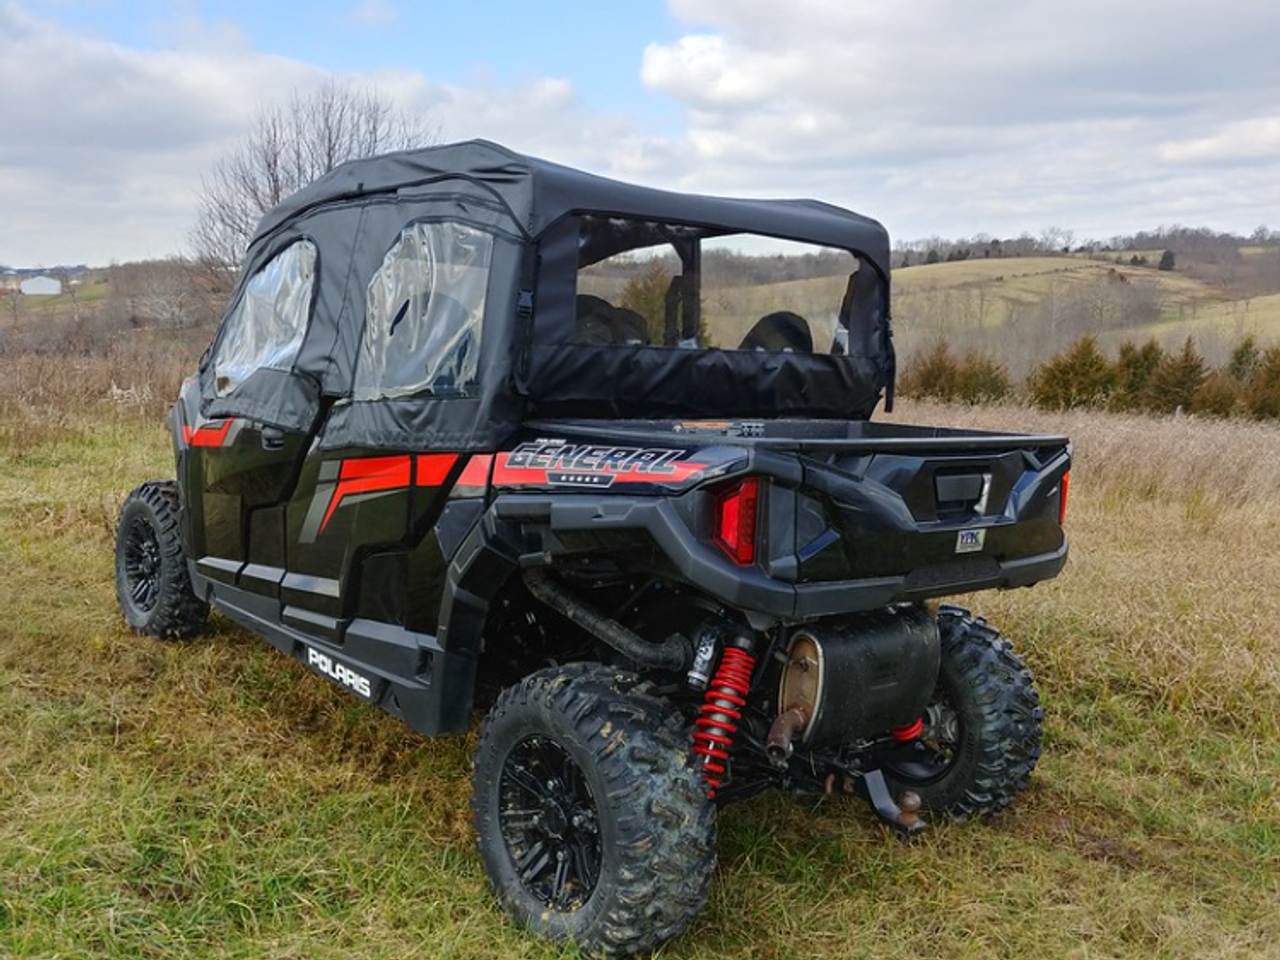 3 Star side x side Polaris General Crew full cab enclosure rear and side angle view